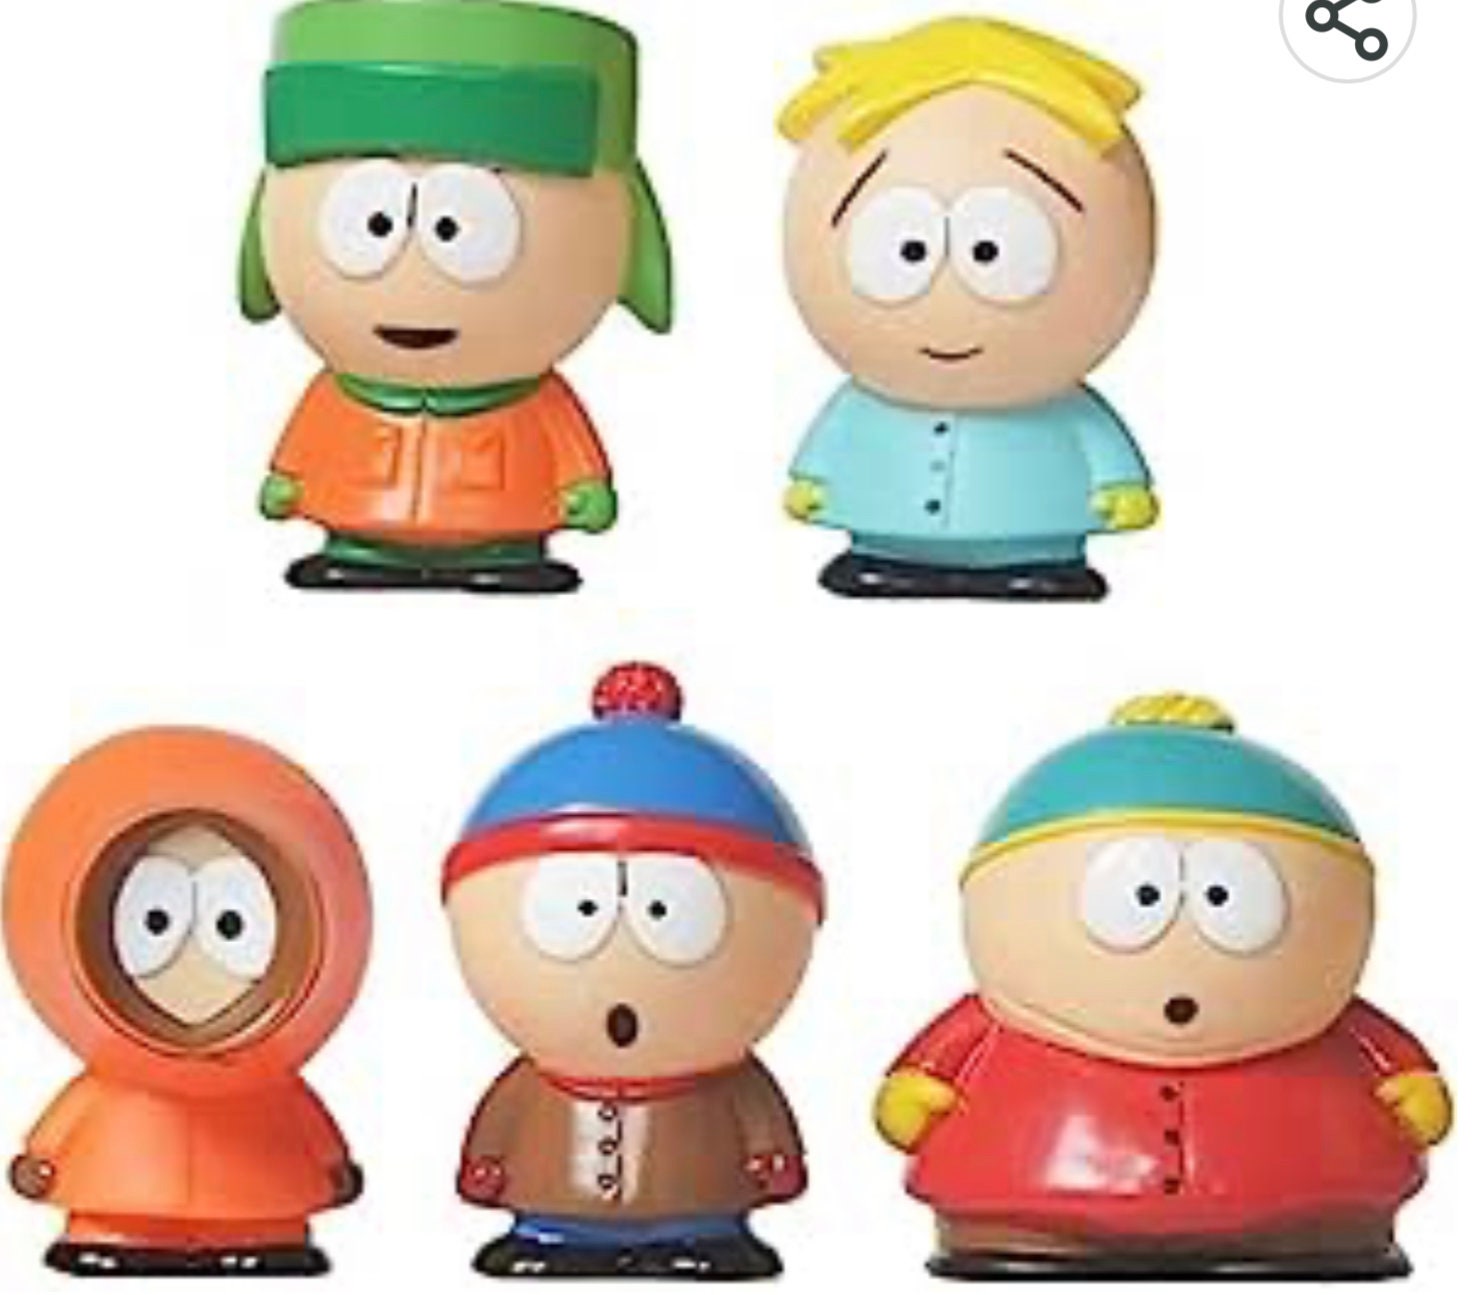 South Park Butters Weiners Out 16 oz Thermal Tumbler – South Park Shop